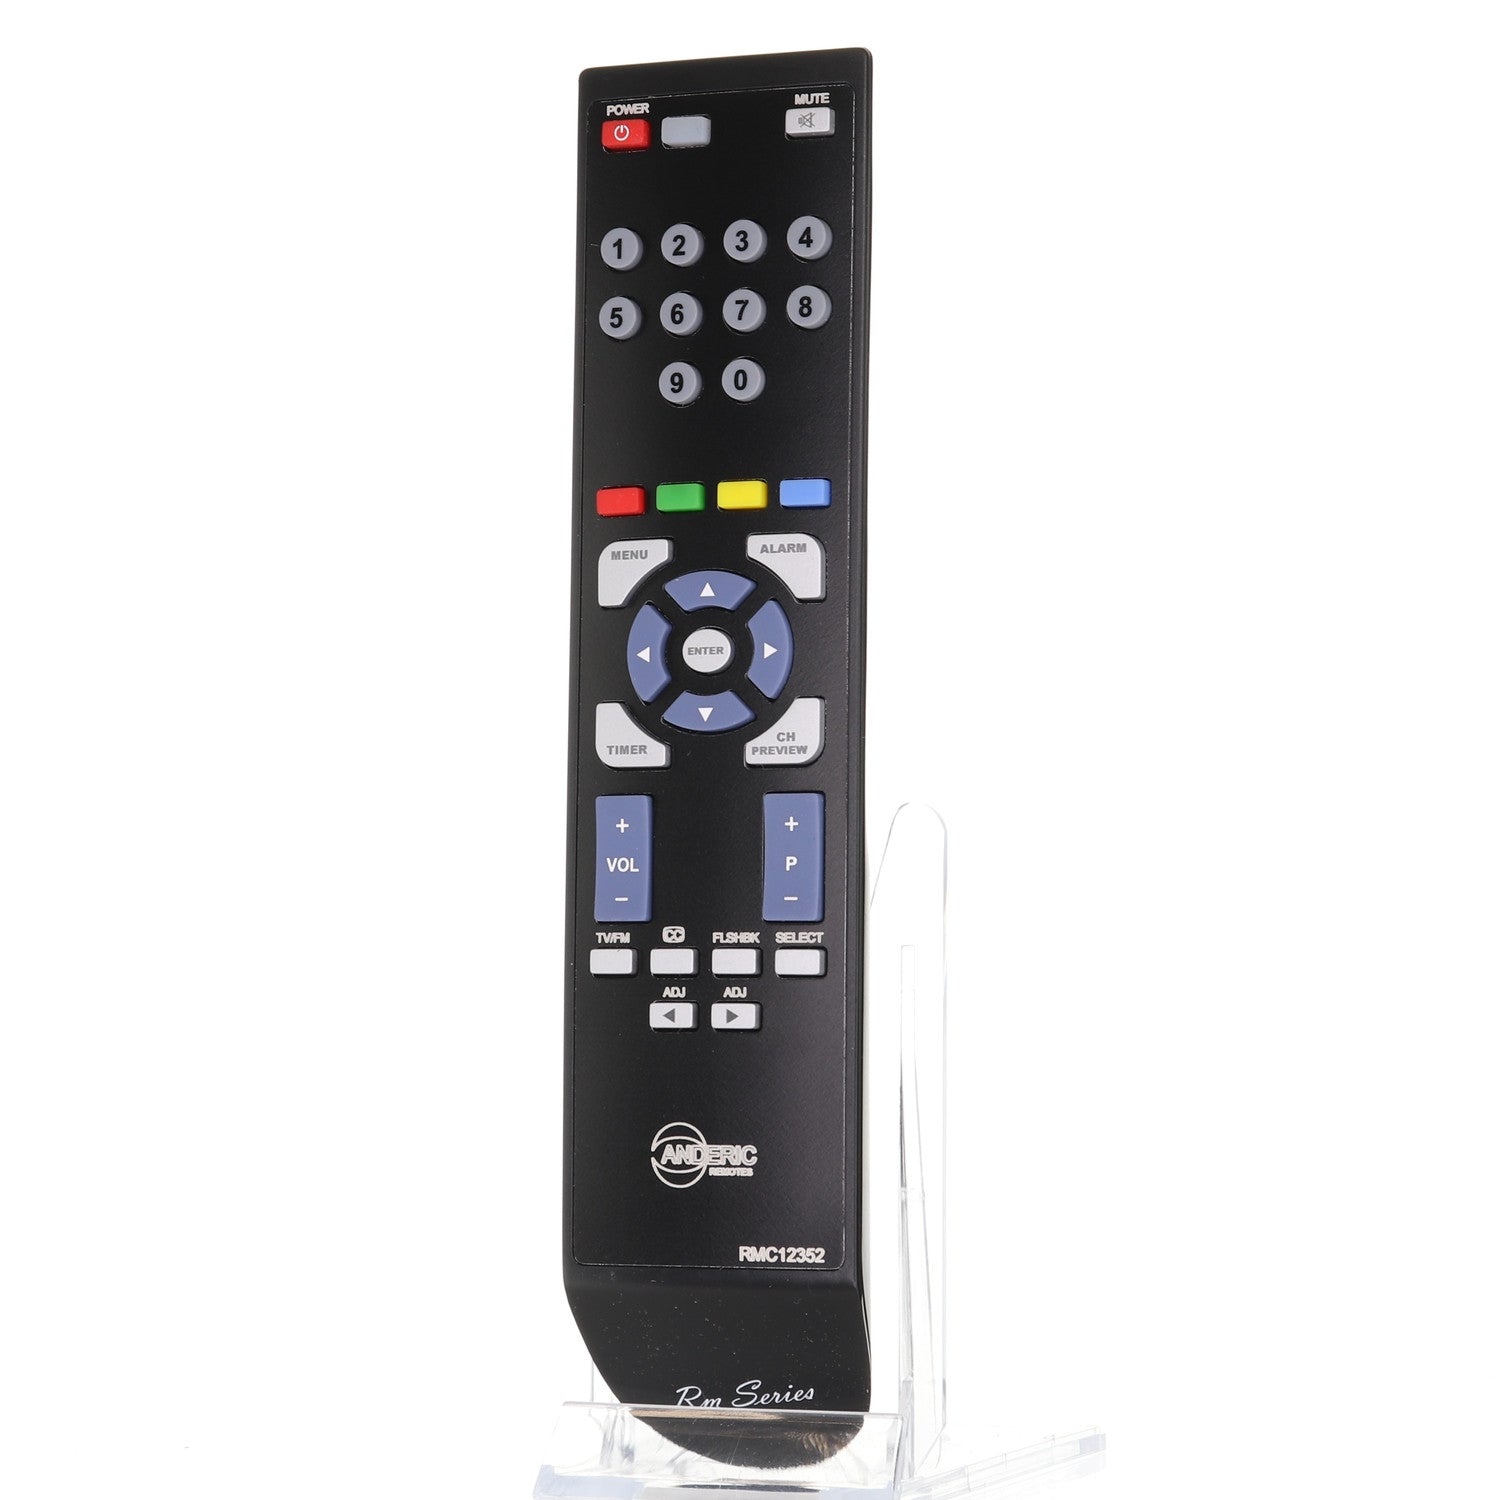 RMC12352 (6710V00108D) Remote Control for Zenith® Commercial TVs